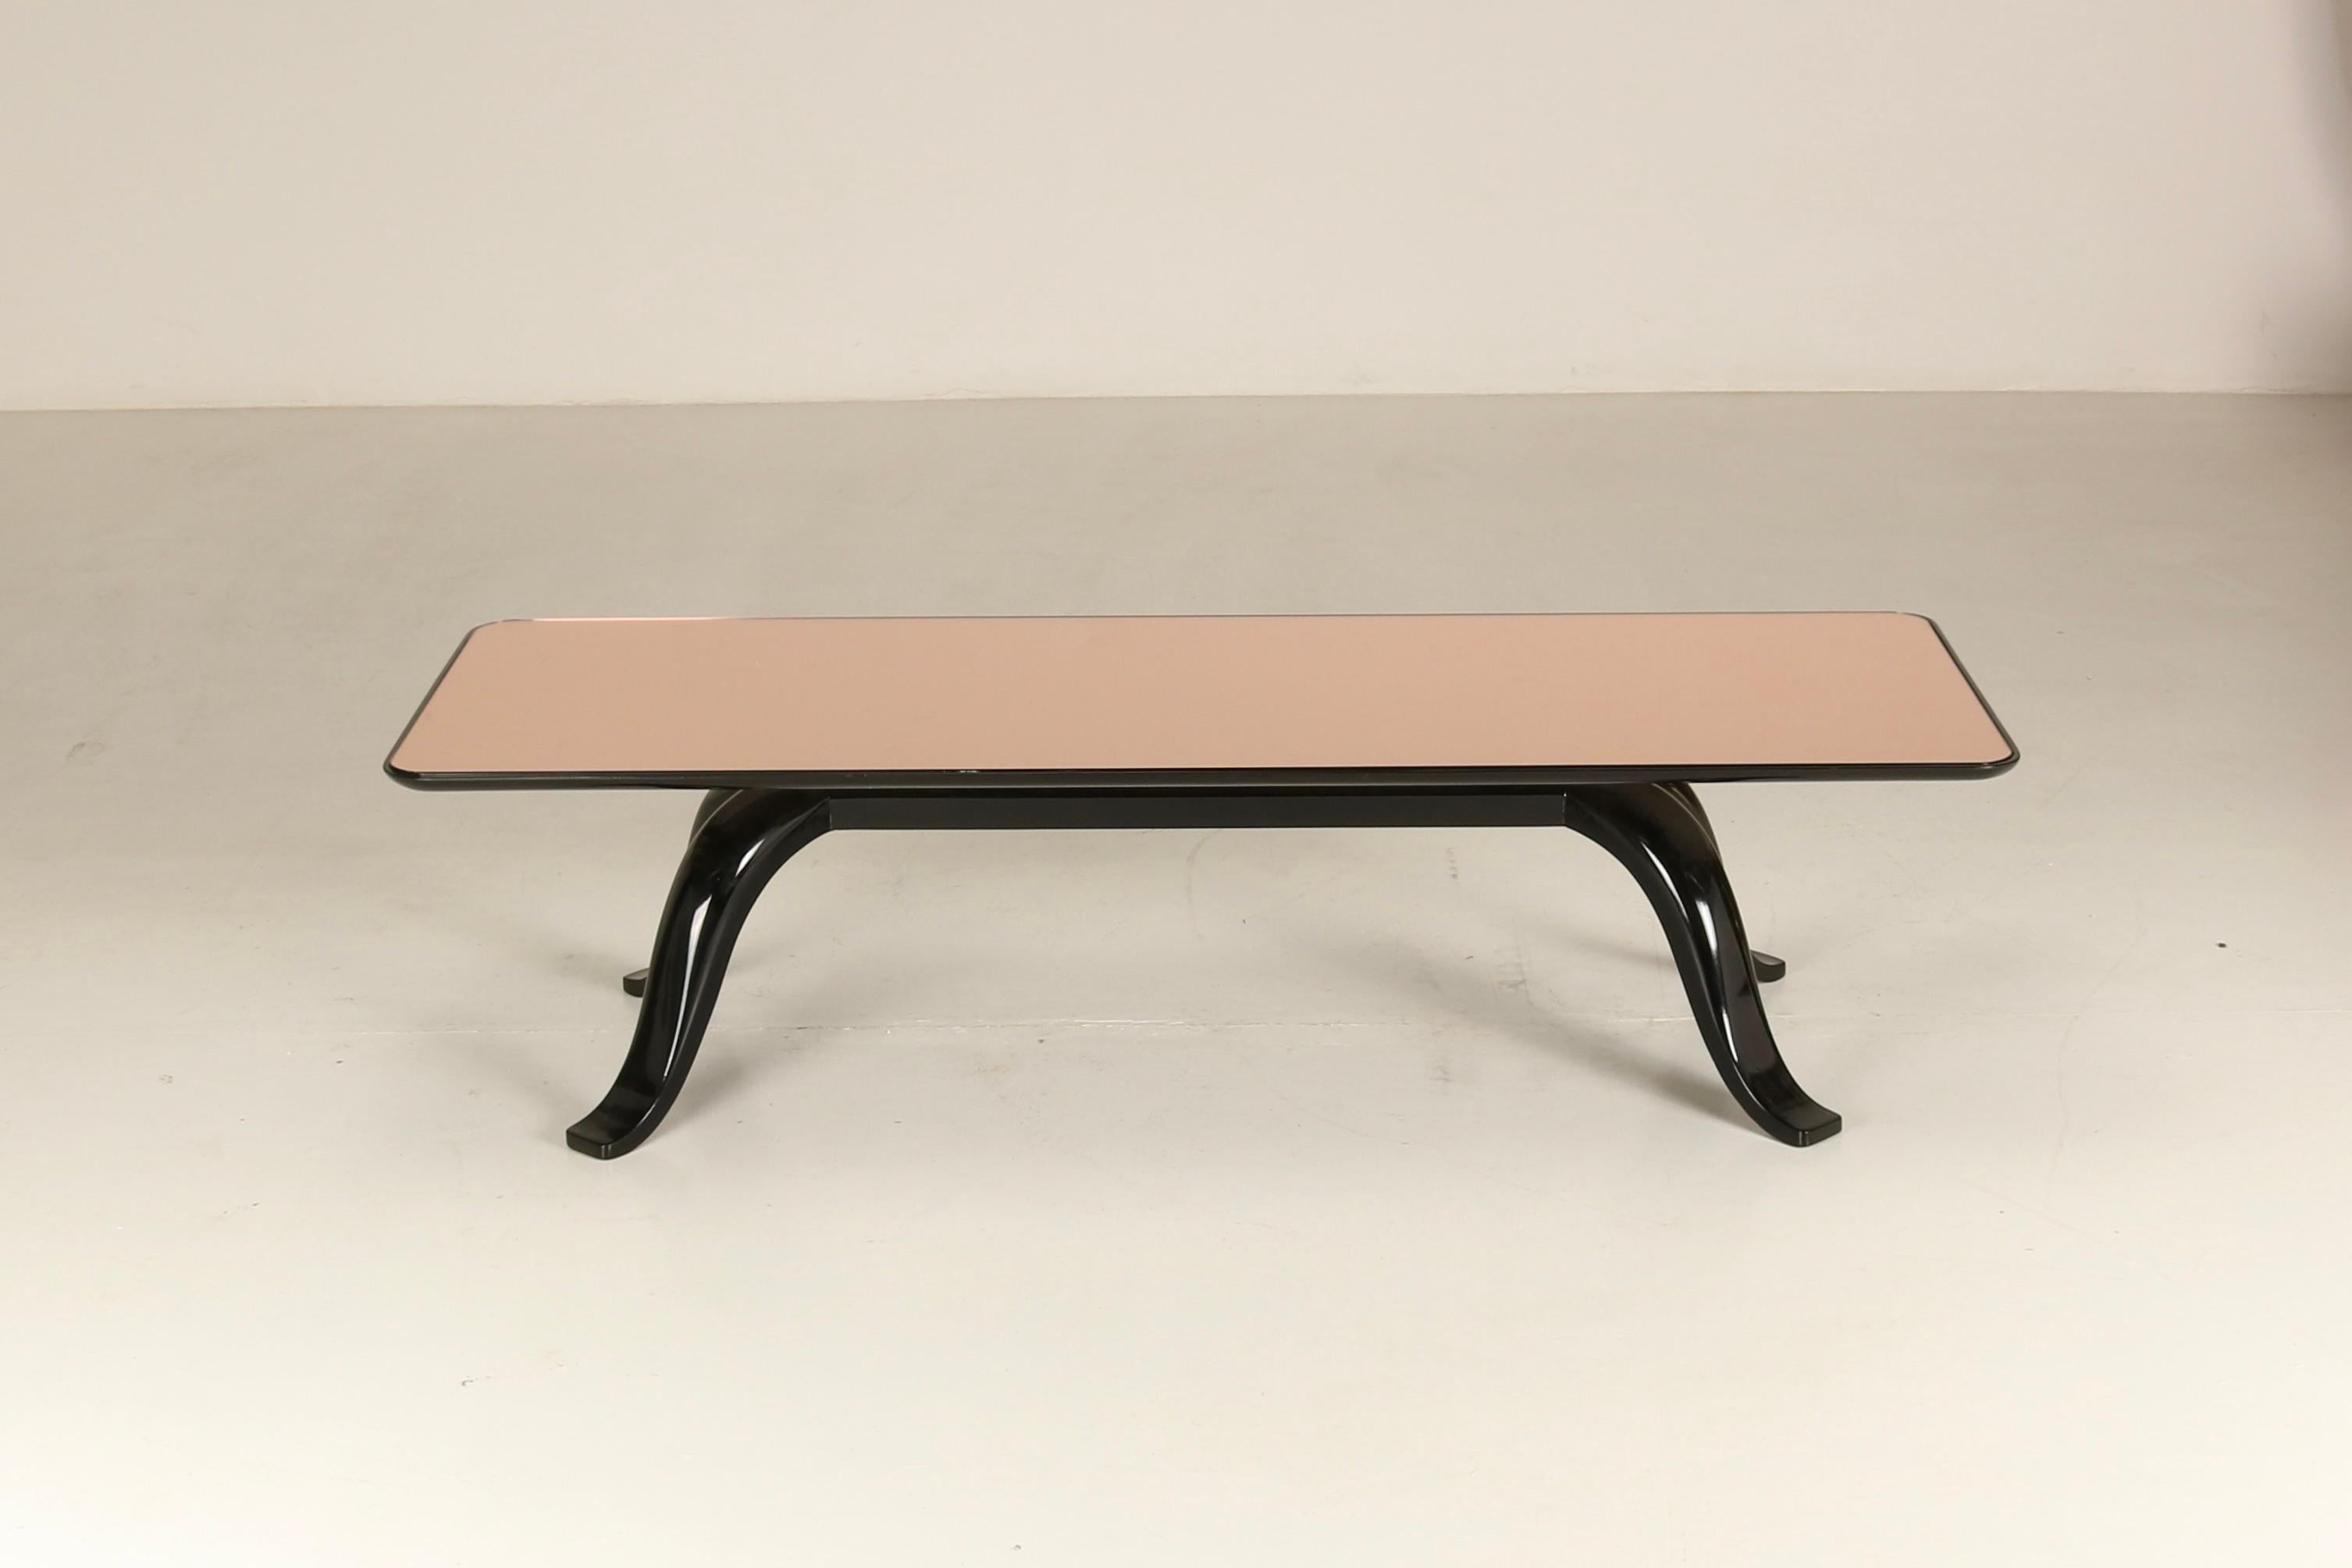 Pink Mirrored Low Table By Pietro Chiesa, Fontana Arte, Italian Design '30 For Sale 1